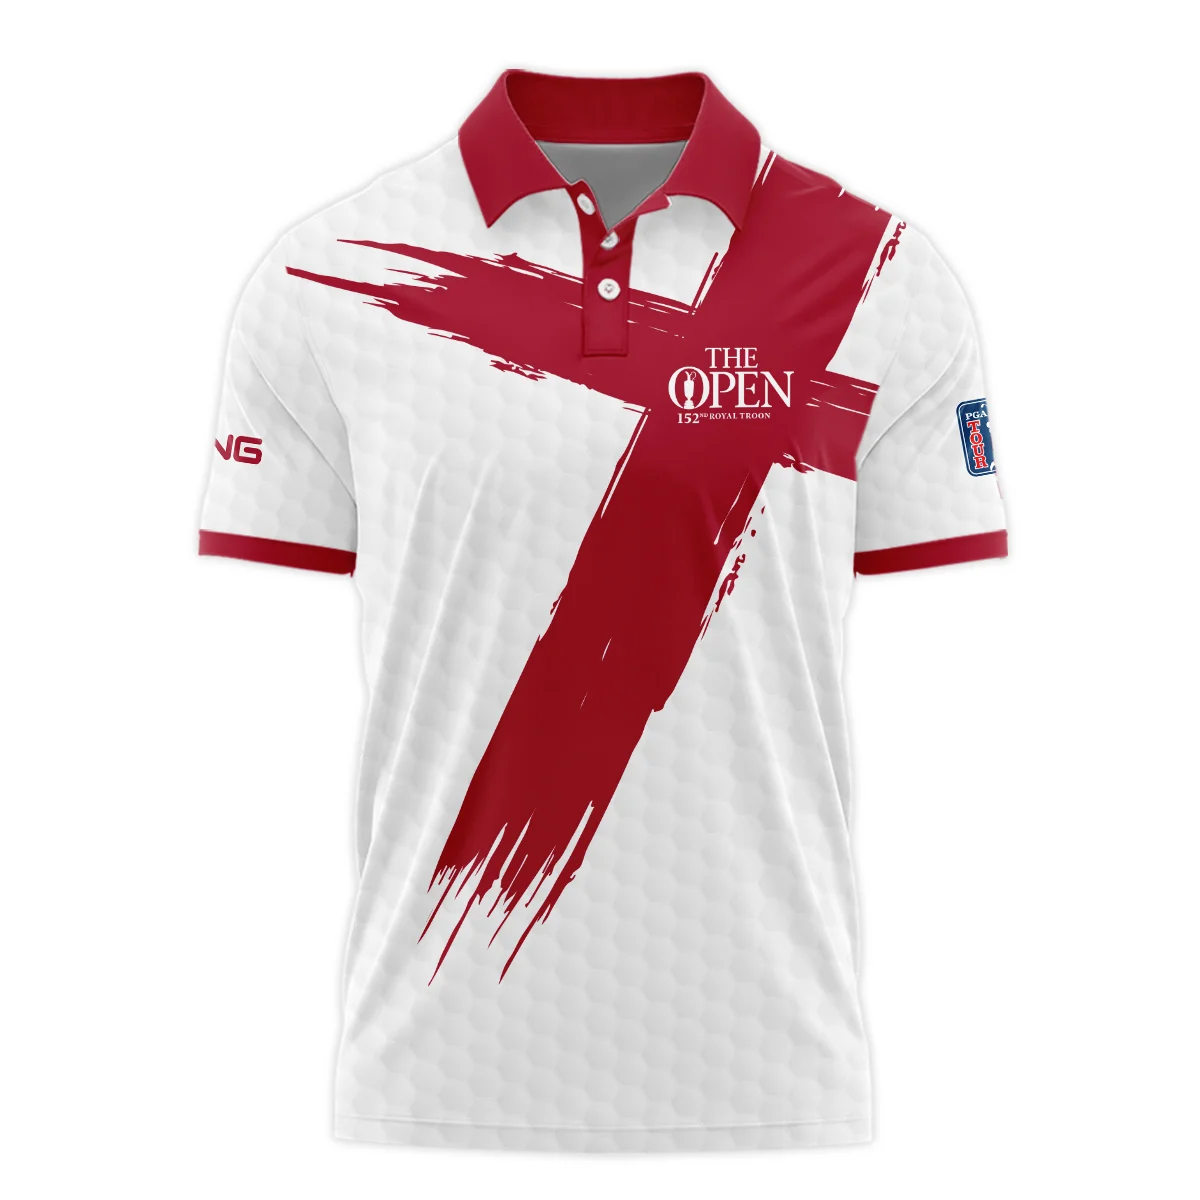 Ping 152nd The Open Championship Golf Sport Unisex T-Shirt Red White Golf Pattern All Over Print T-Shirt